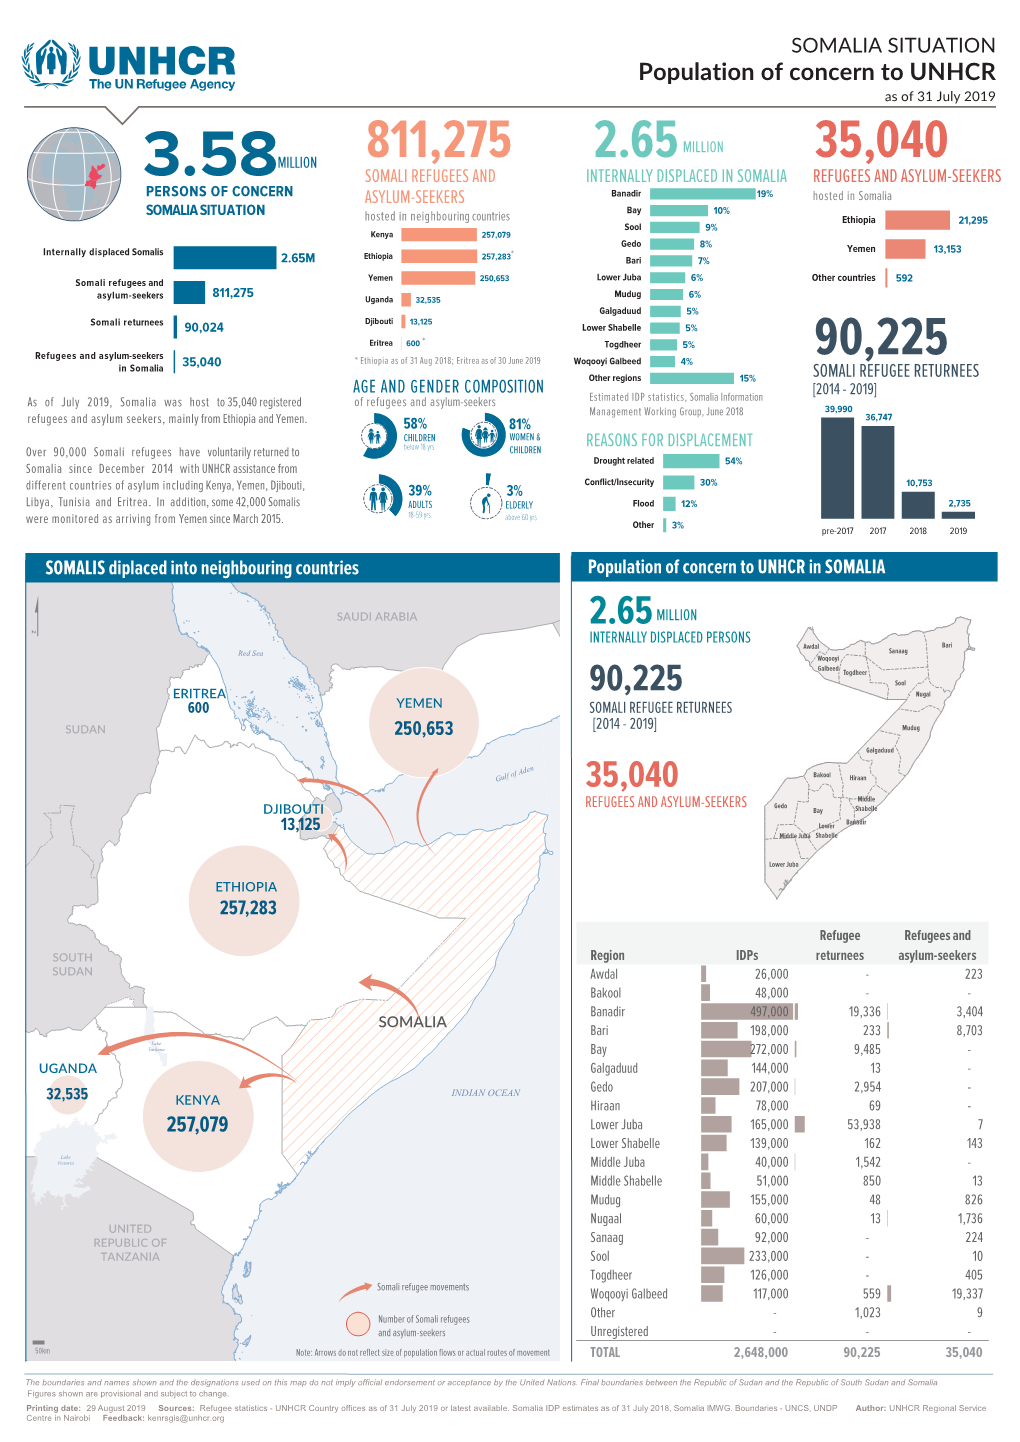 UNHCR As of 31 July 2019